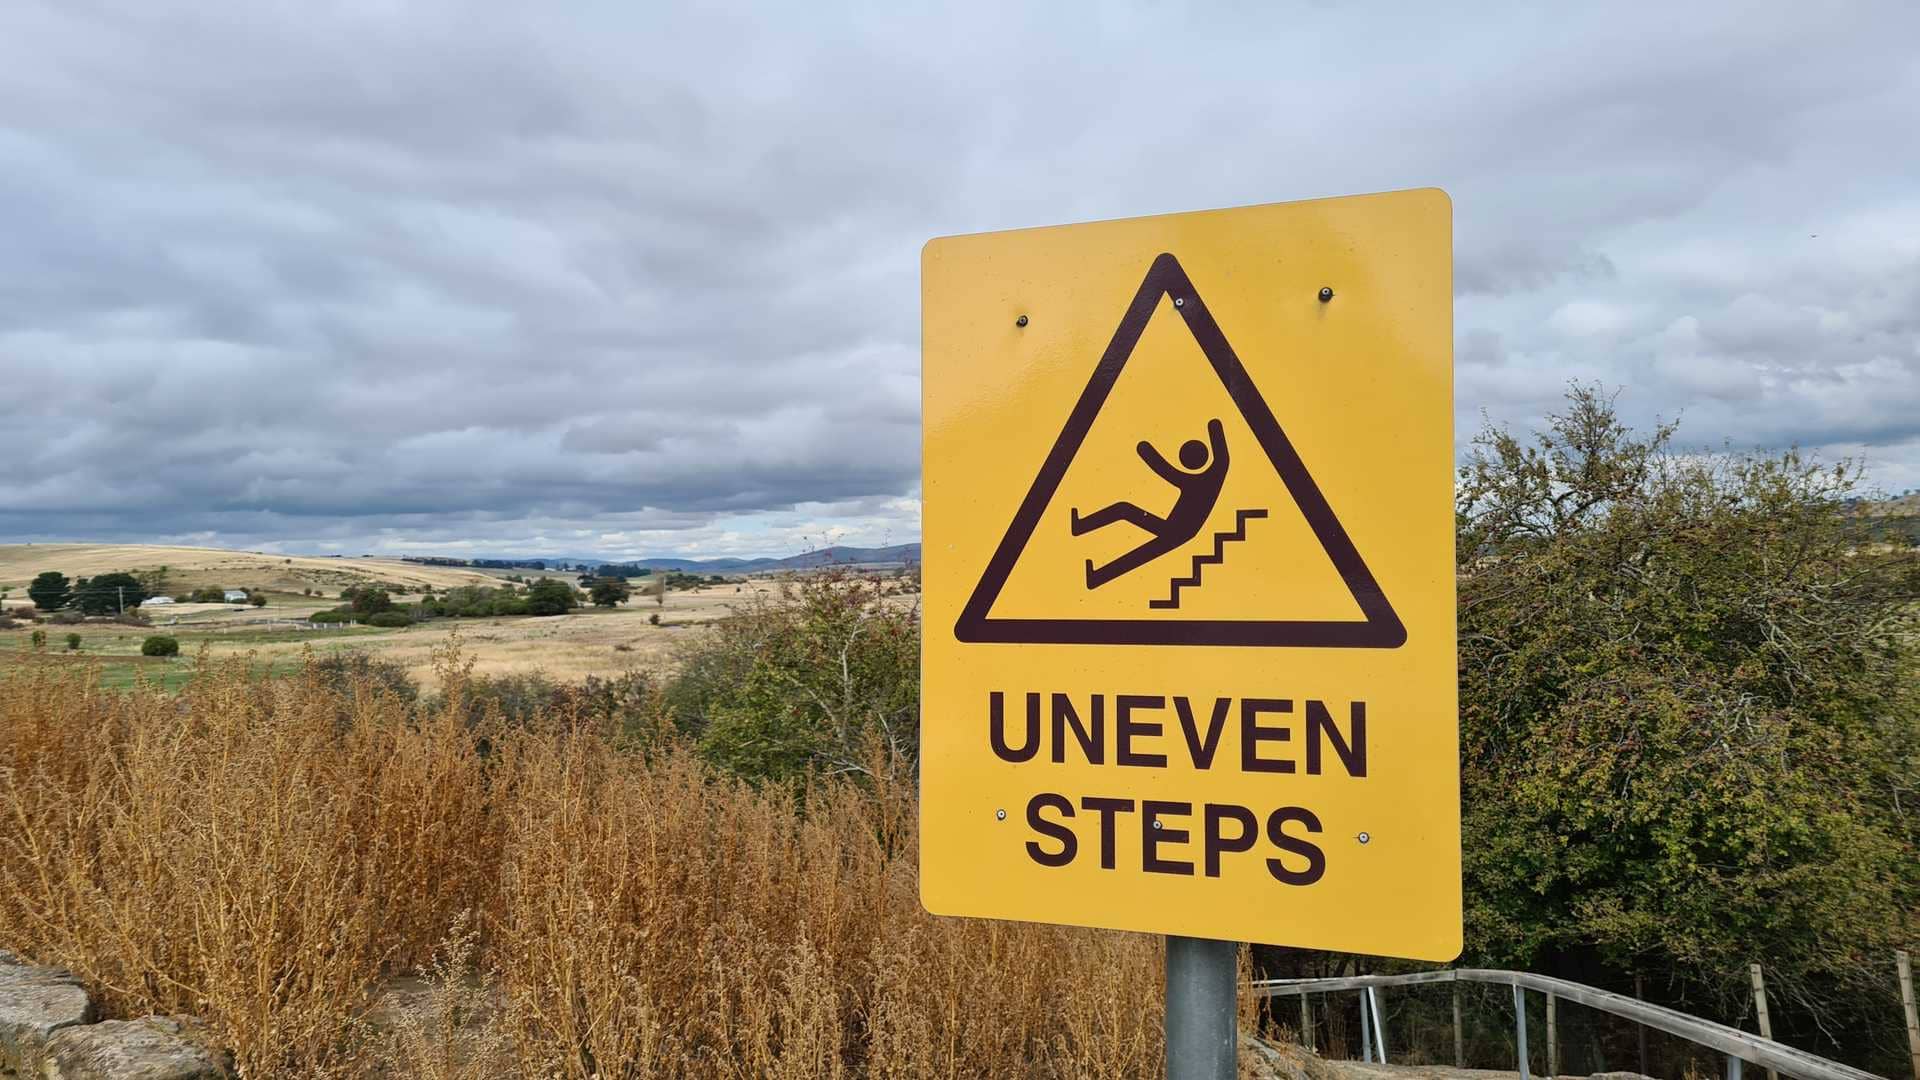 Uneven steps with man slipping for Personal Injury Cases We Handle in Hawaii